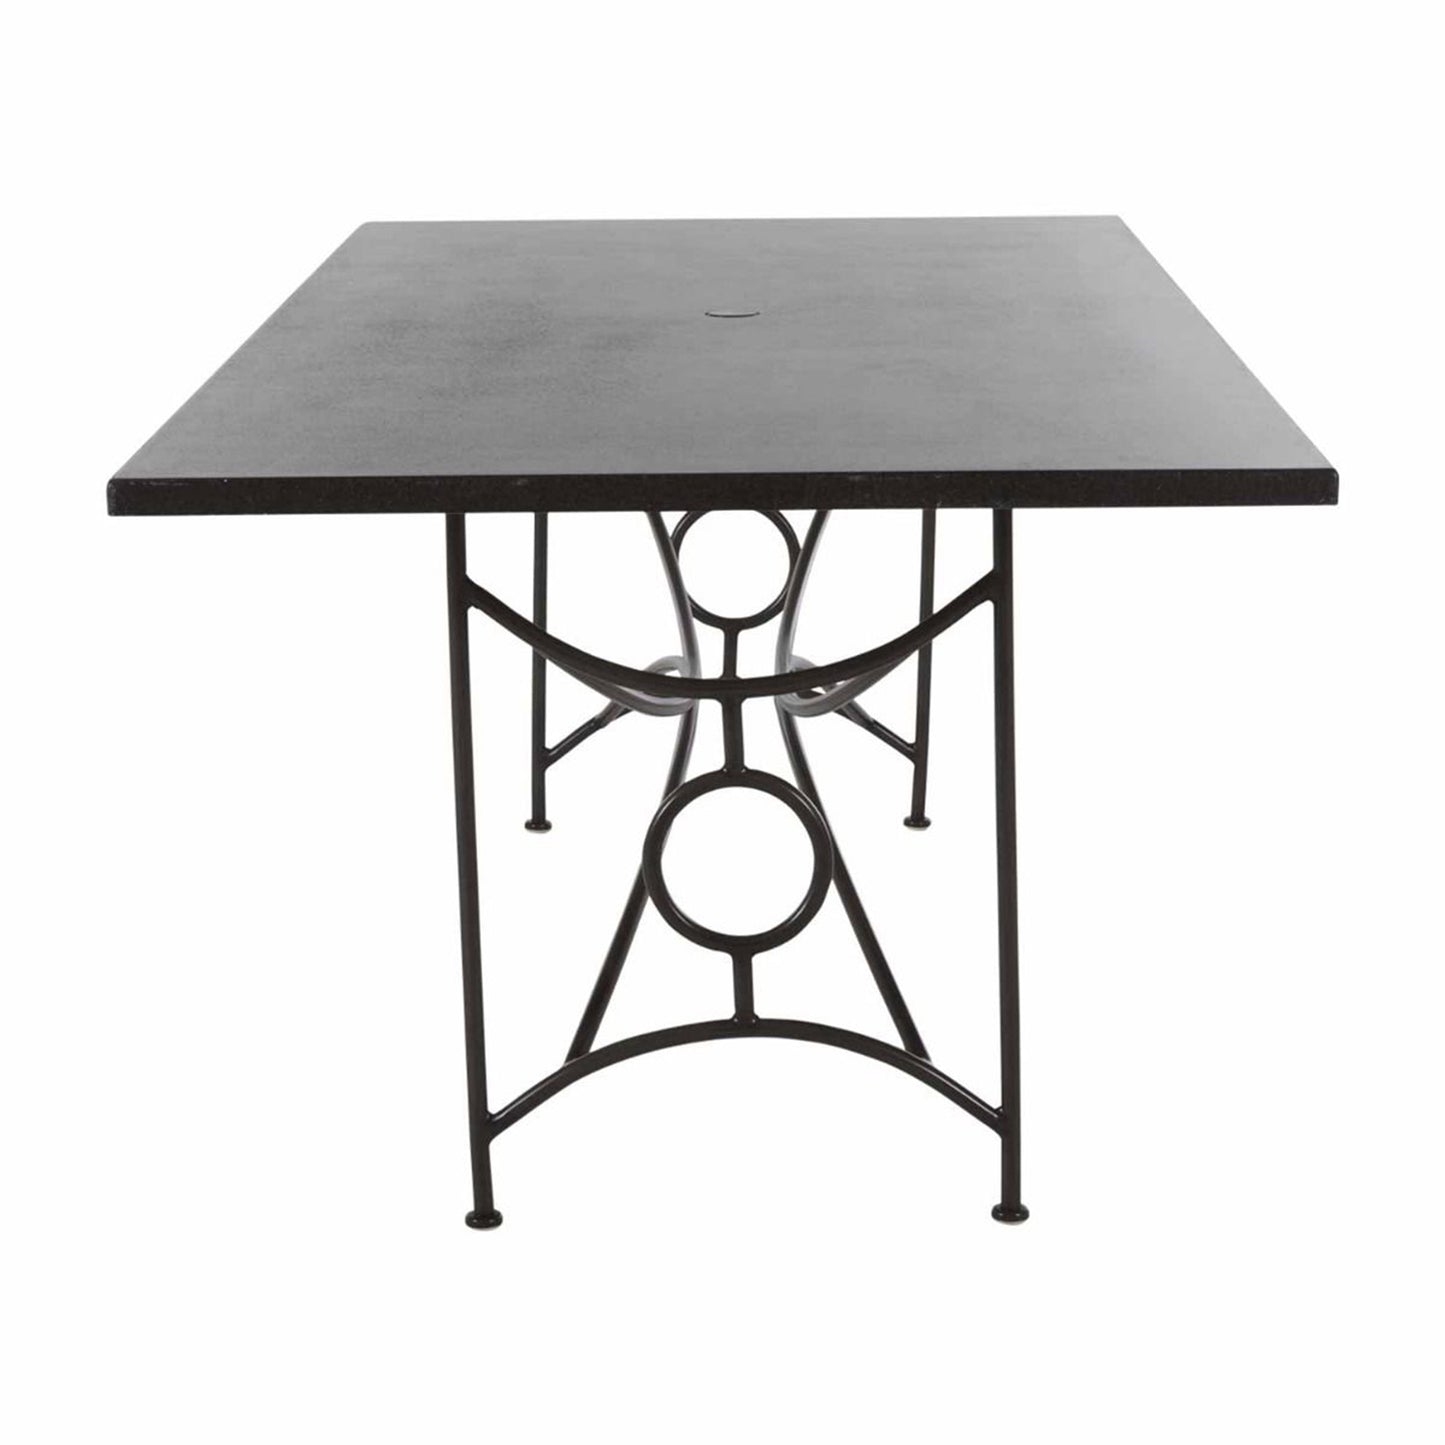 Superstone 84" x 40" Rectangular Dining Table (w/ Base)